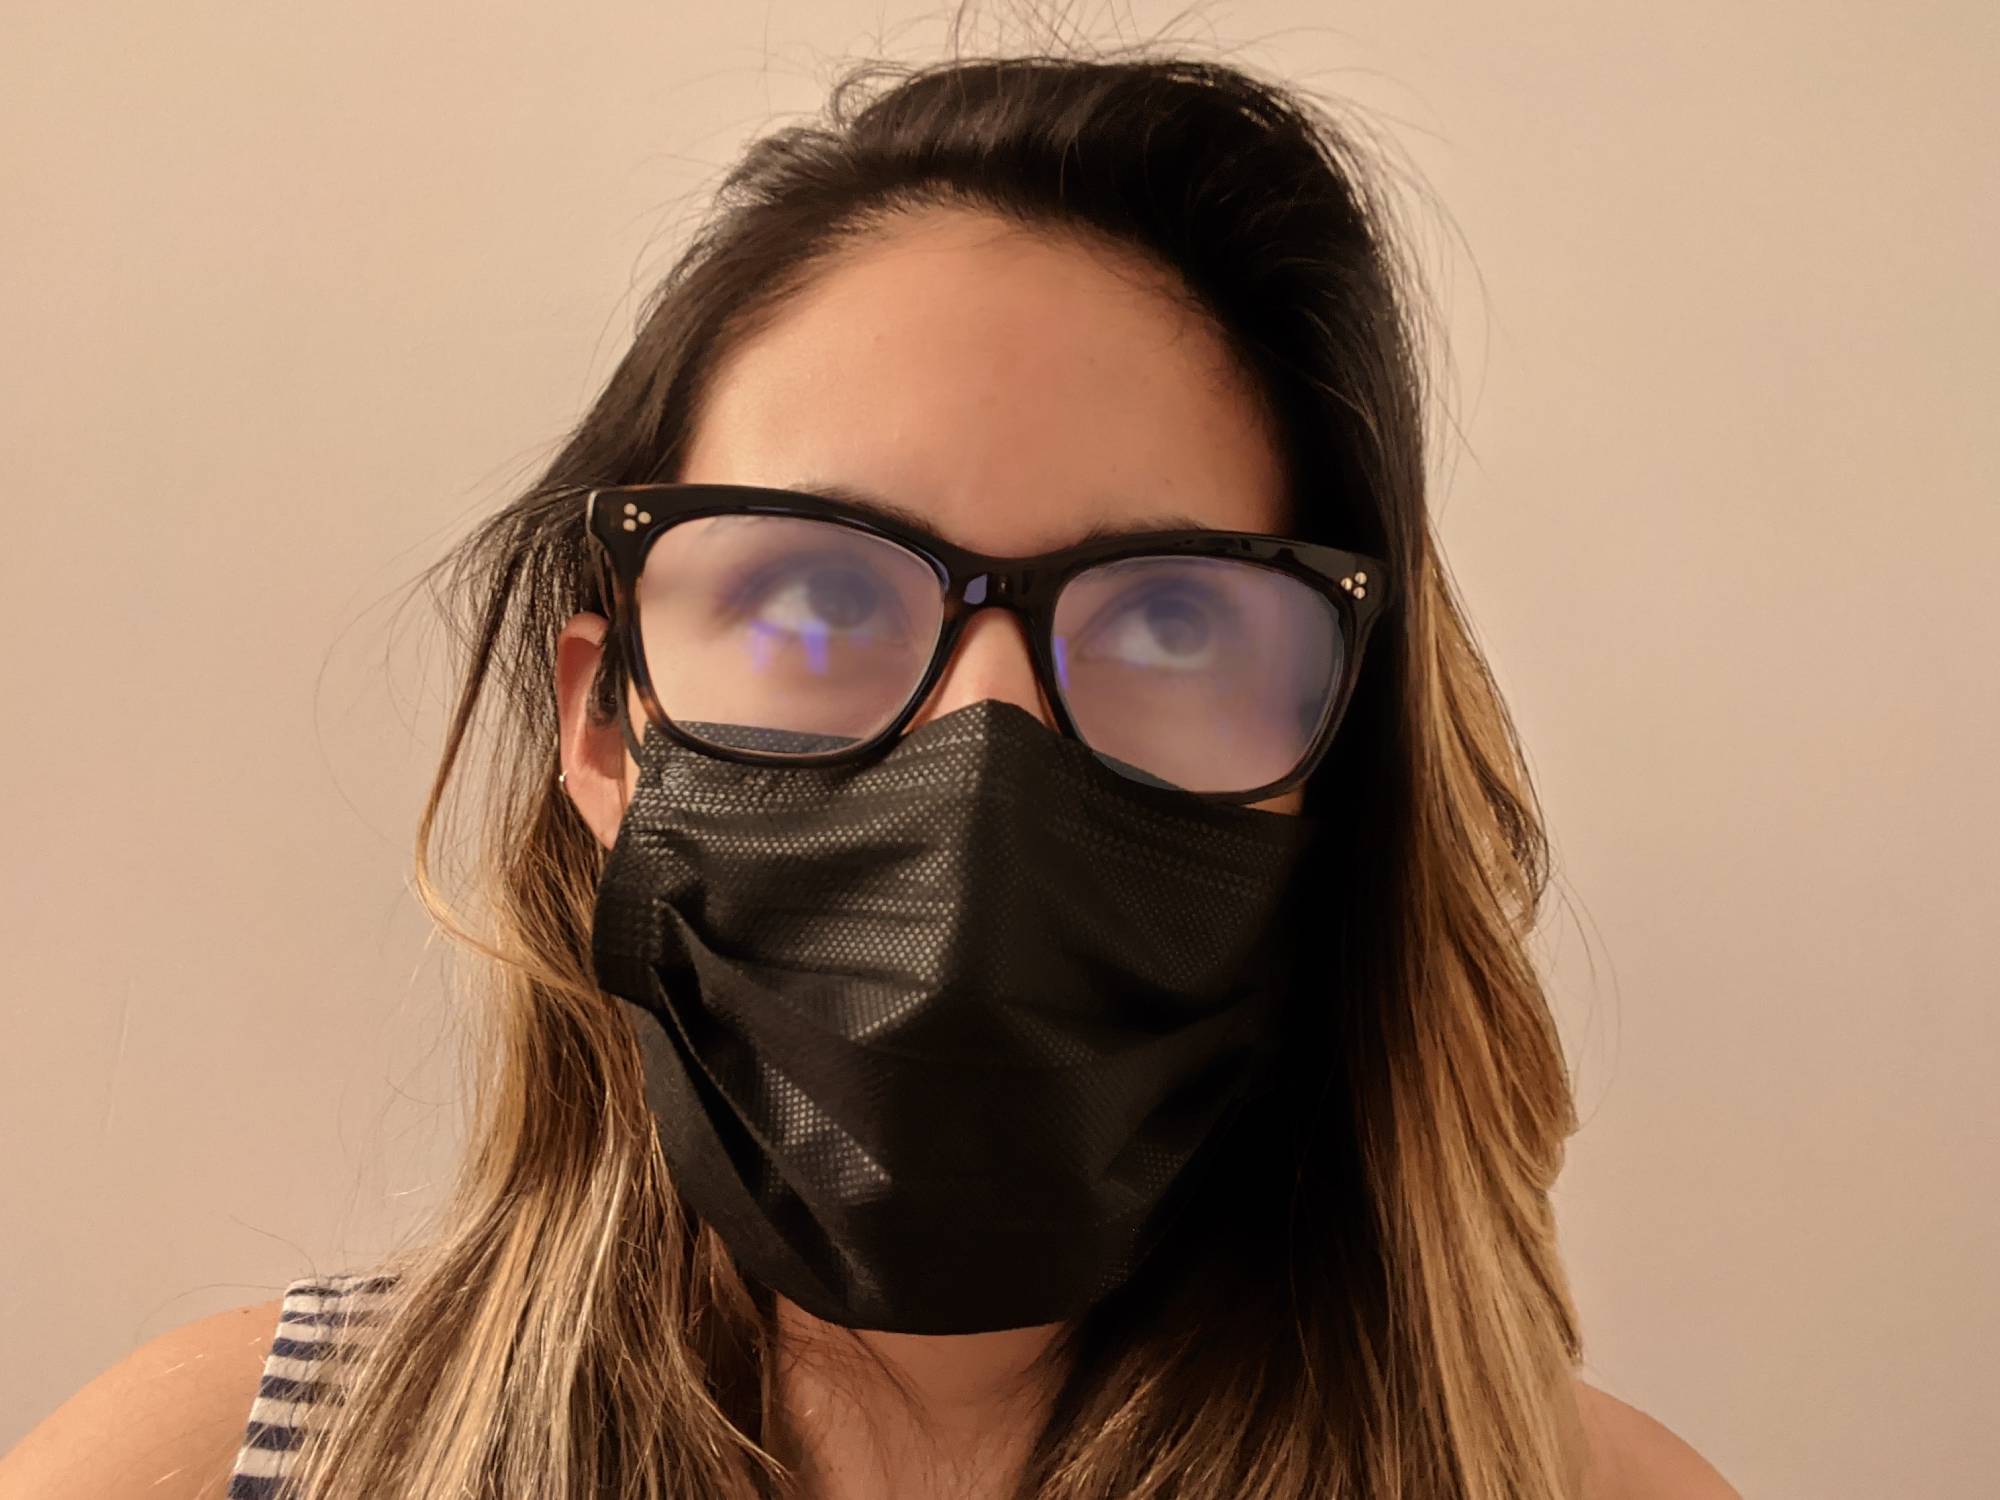 How to stop glasses from fogging up while wearing a mask